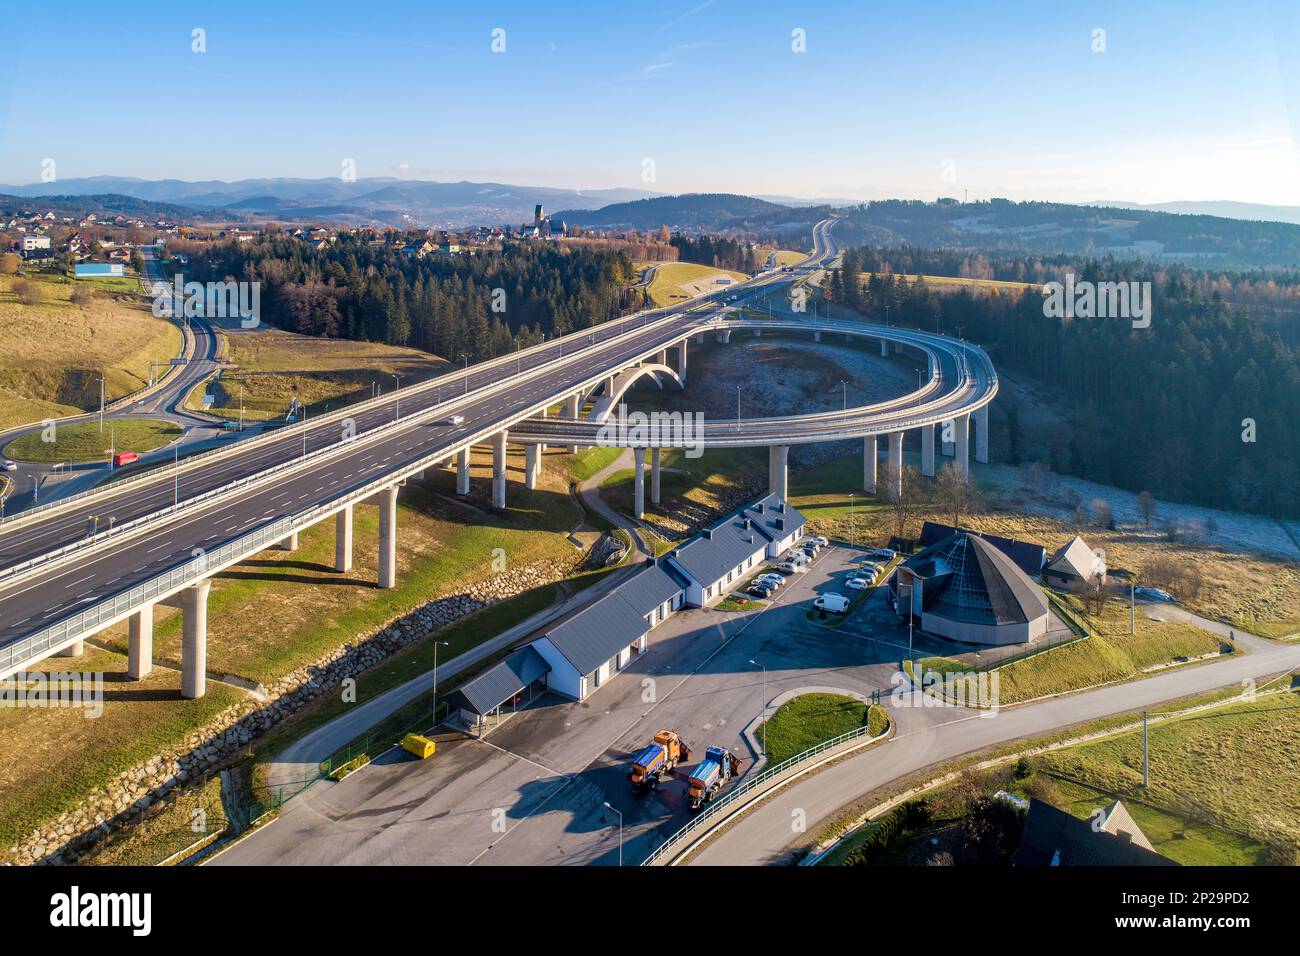 New highway in Poland on national road no 7, E77, called Zakopianka.  Overpass junction with a traffic circle, viaducts, slip roads and cars. Skomieln Stock Photo